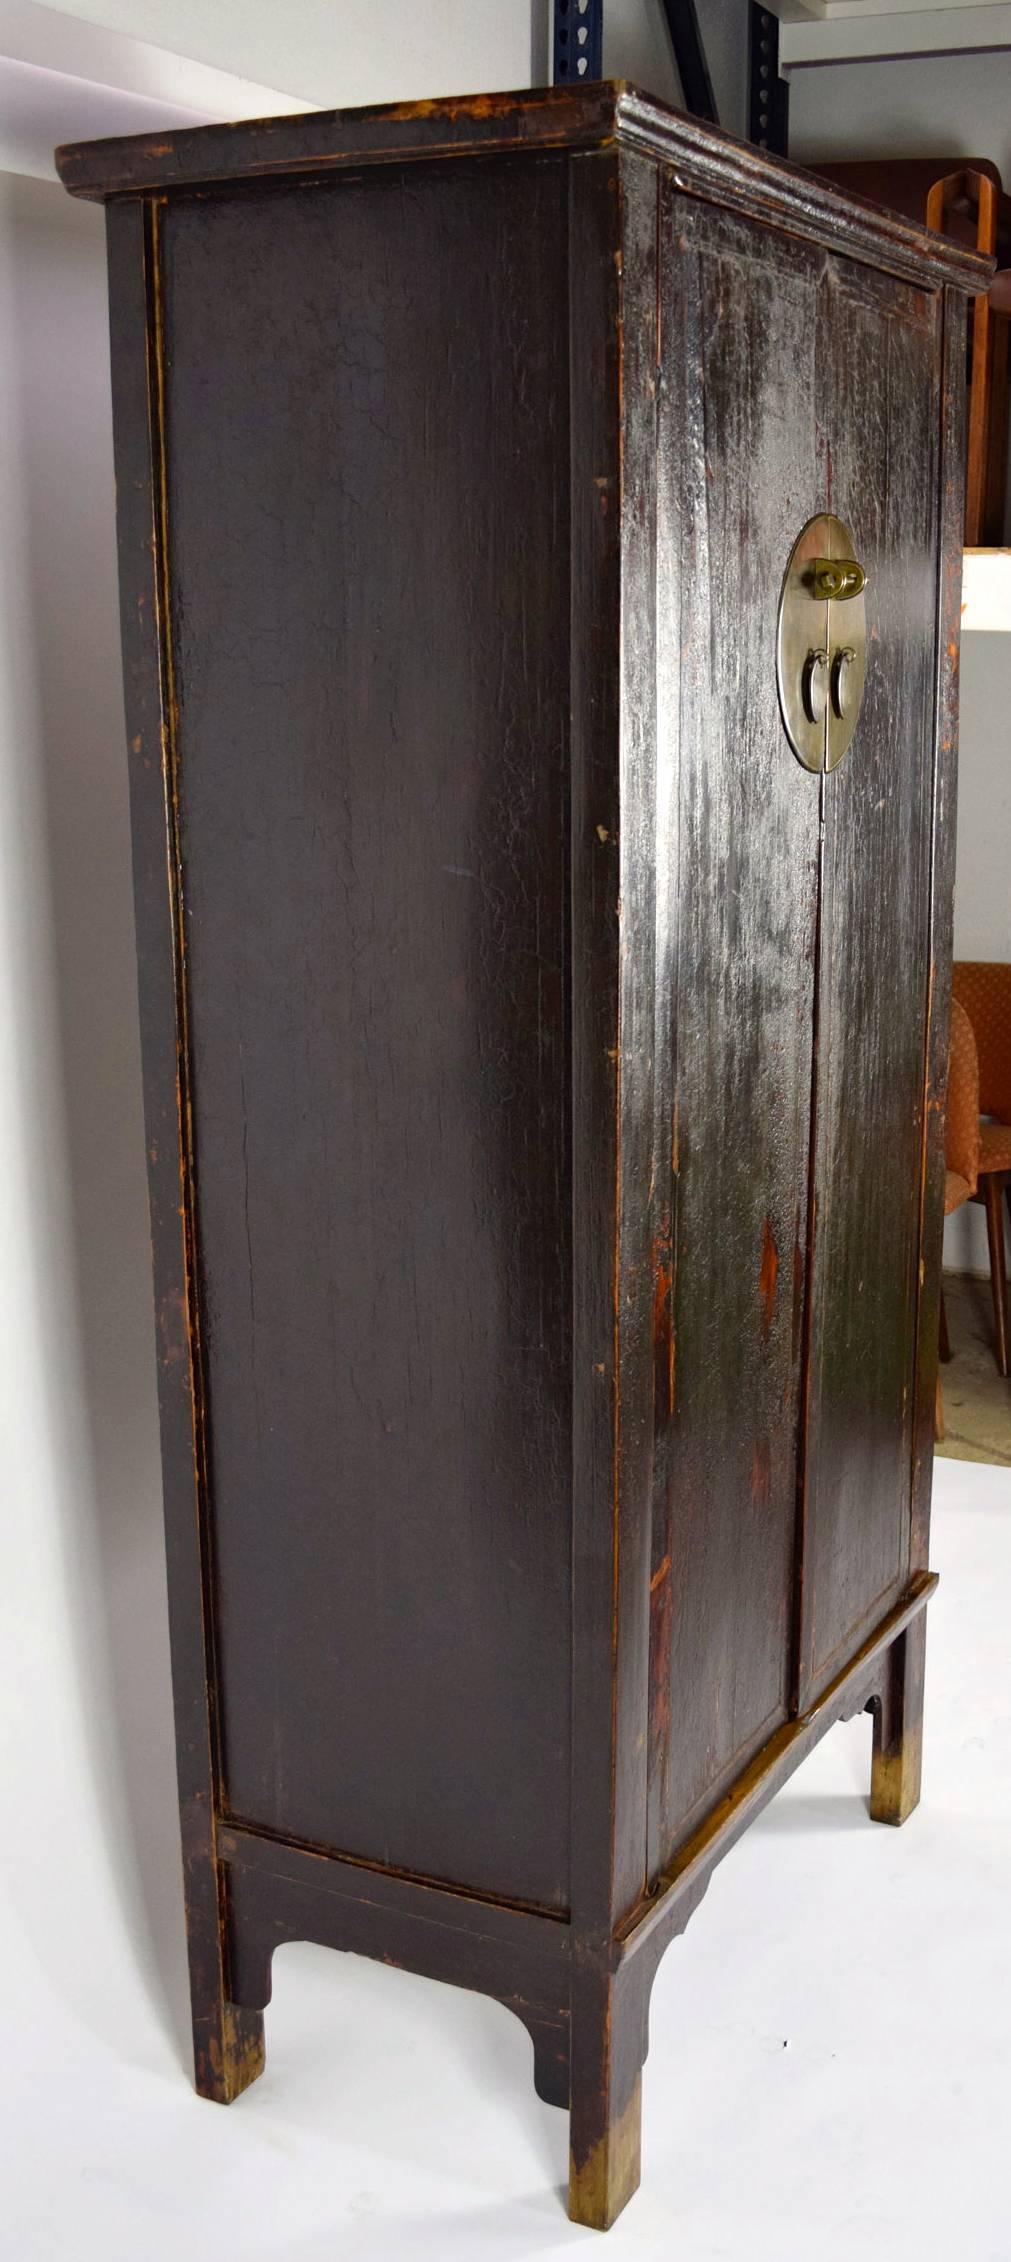 This is a beautiful antique Asian wedding cabinet with a rich patina.